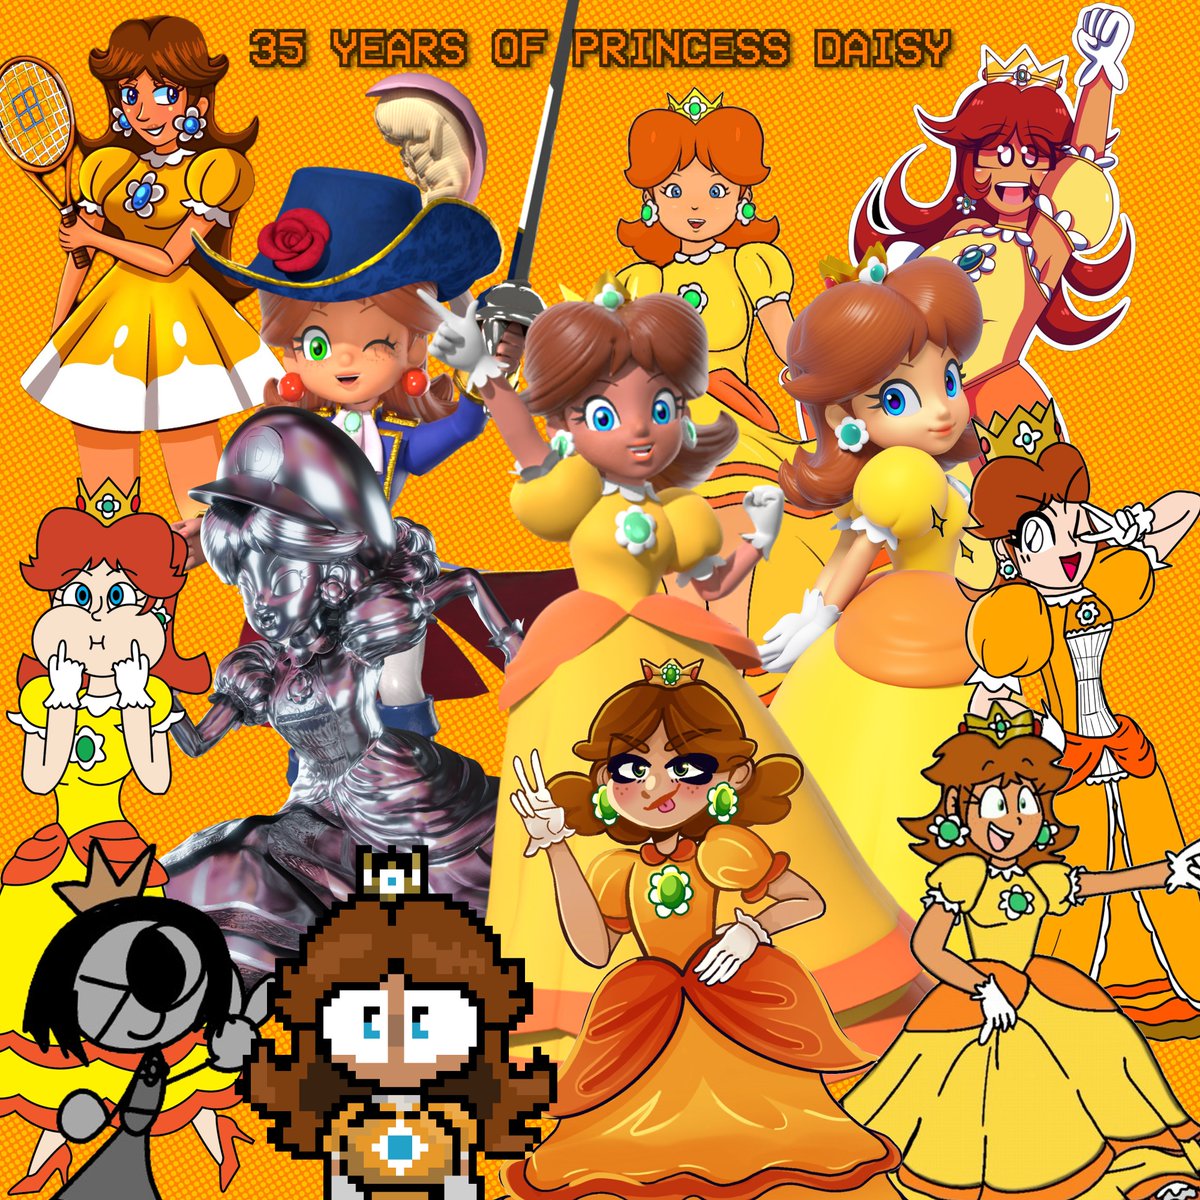 Happy Anniversary to our beloved Princess Daisy!

To celebrate 35 years of this princess, some very talented artists and I put together this collab! :D